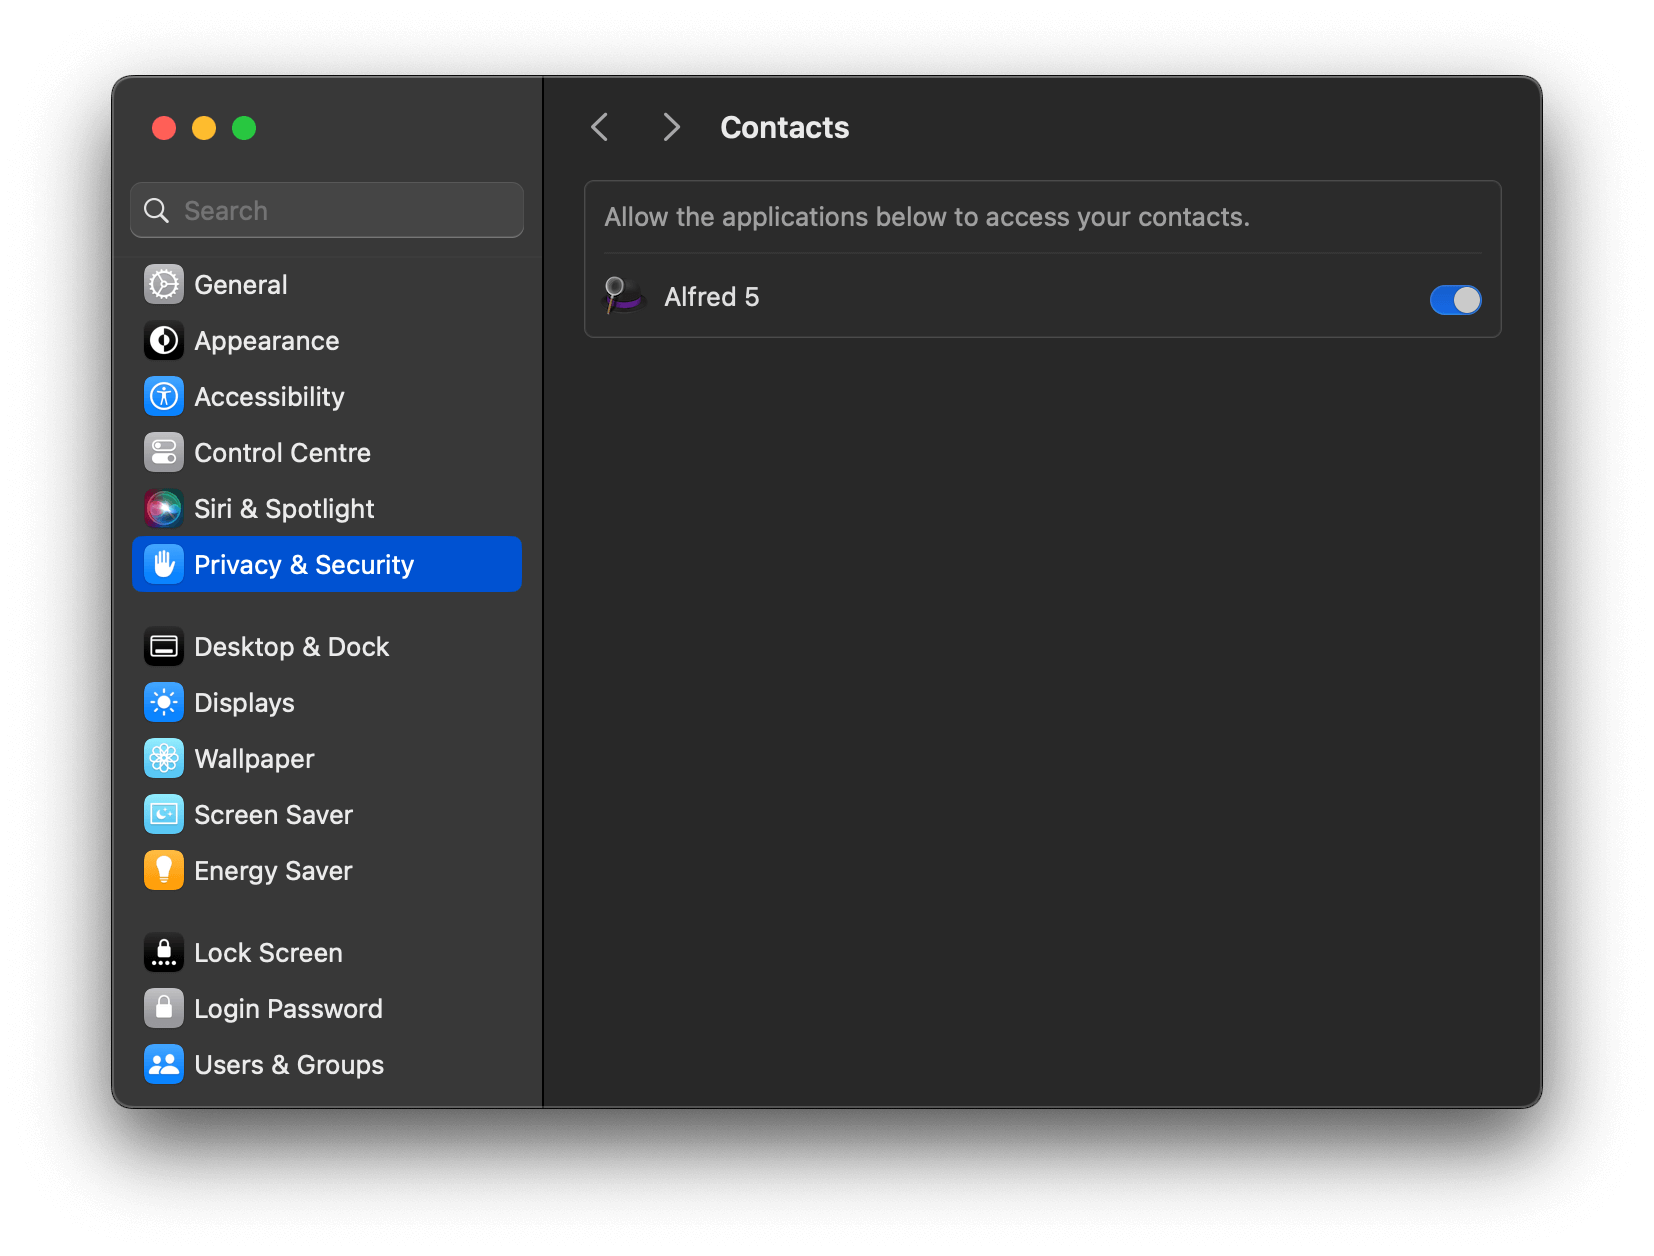 Granting Contacts access in macOS Mojave Security and Privacy Preferences